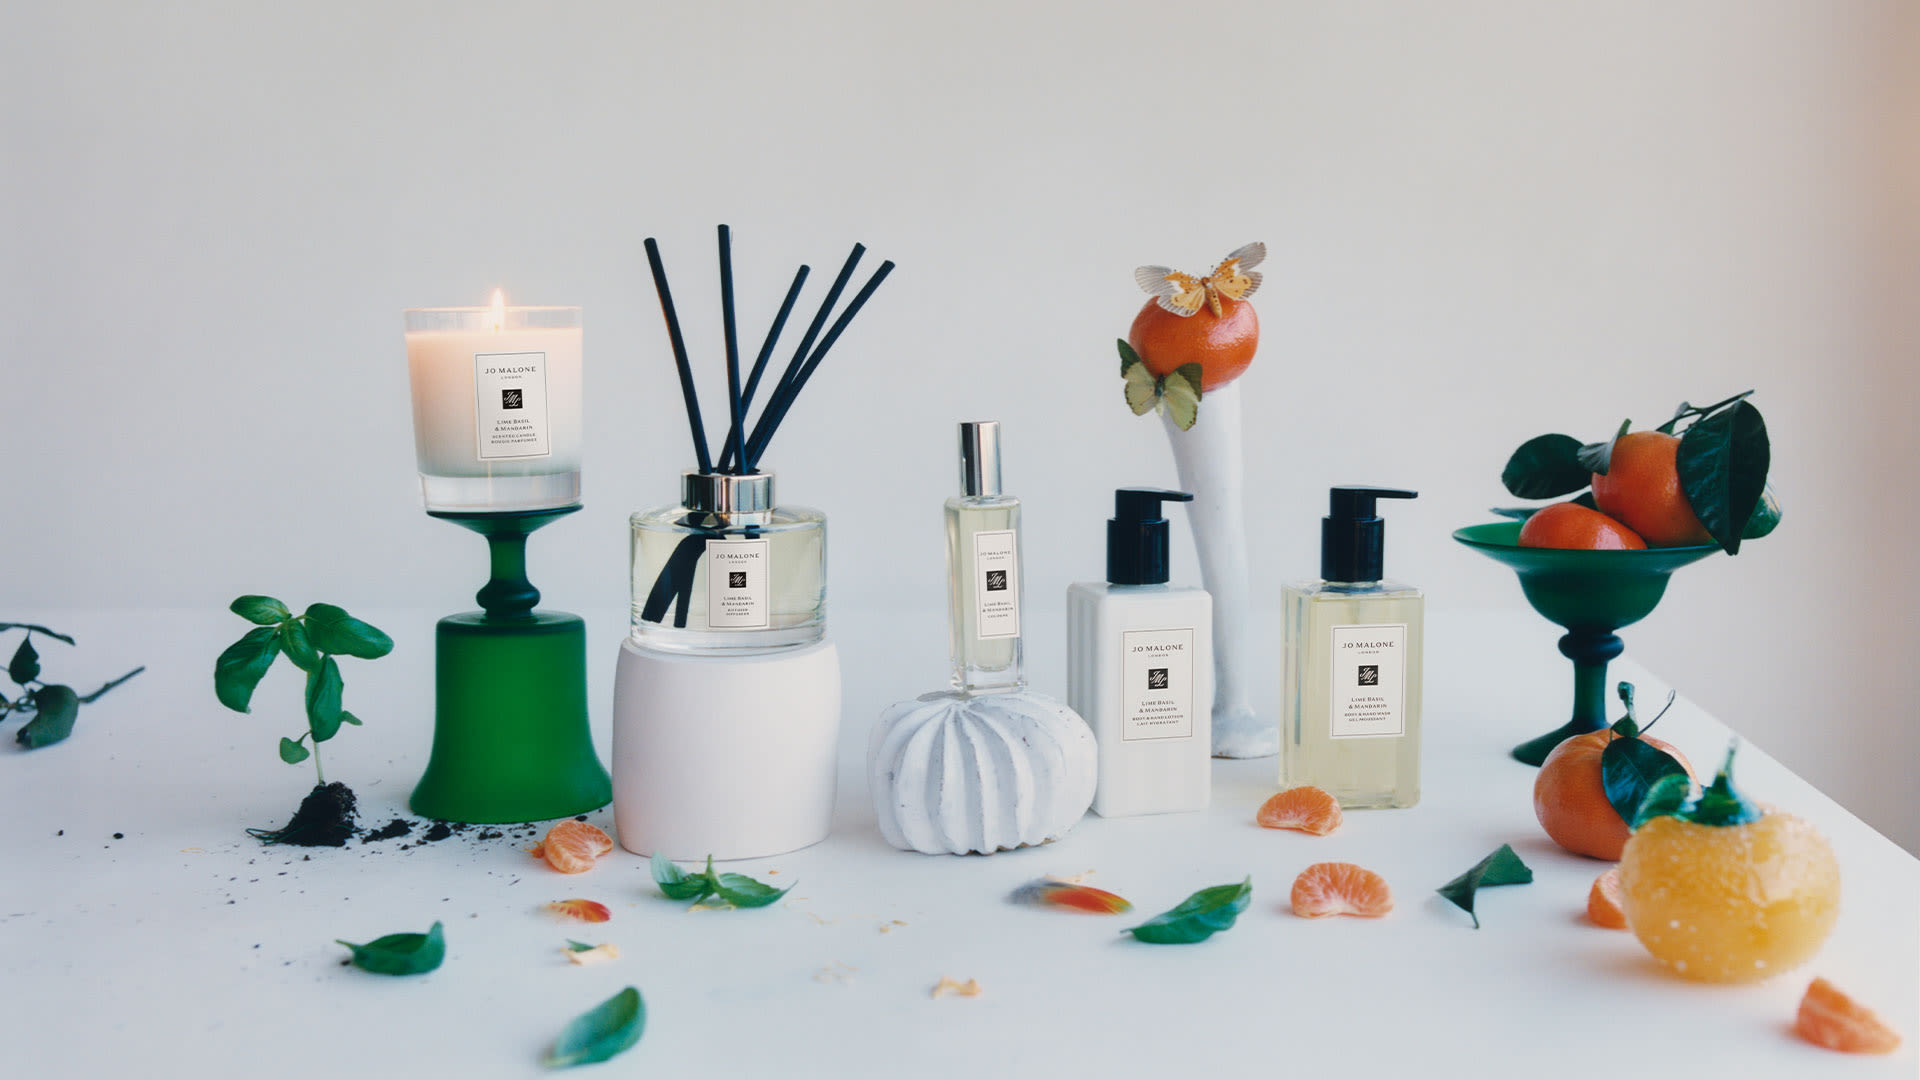 Jo Malone London main image gift boxes at Bicester Village